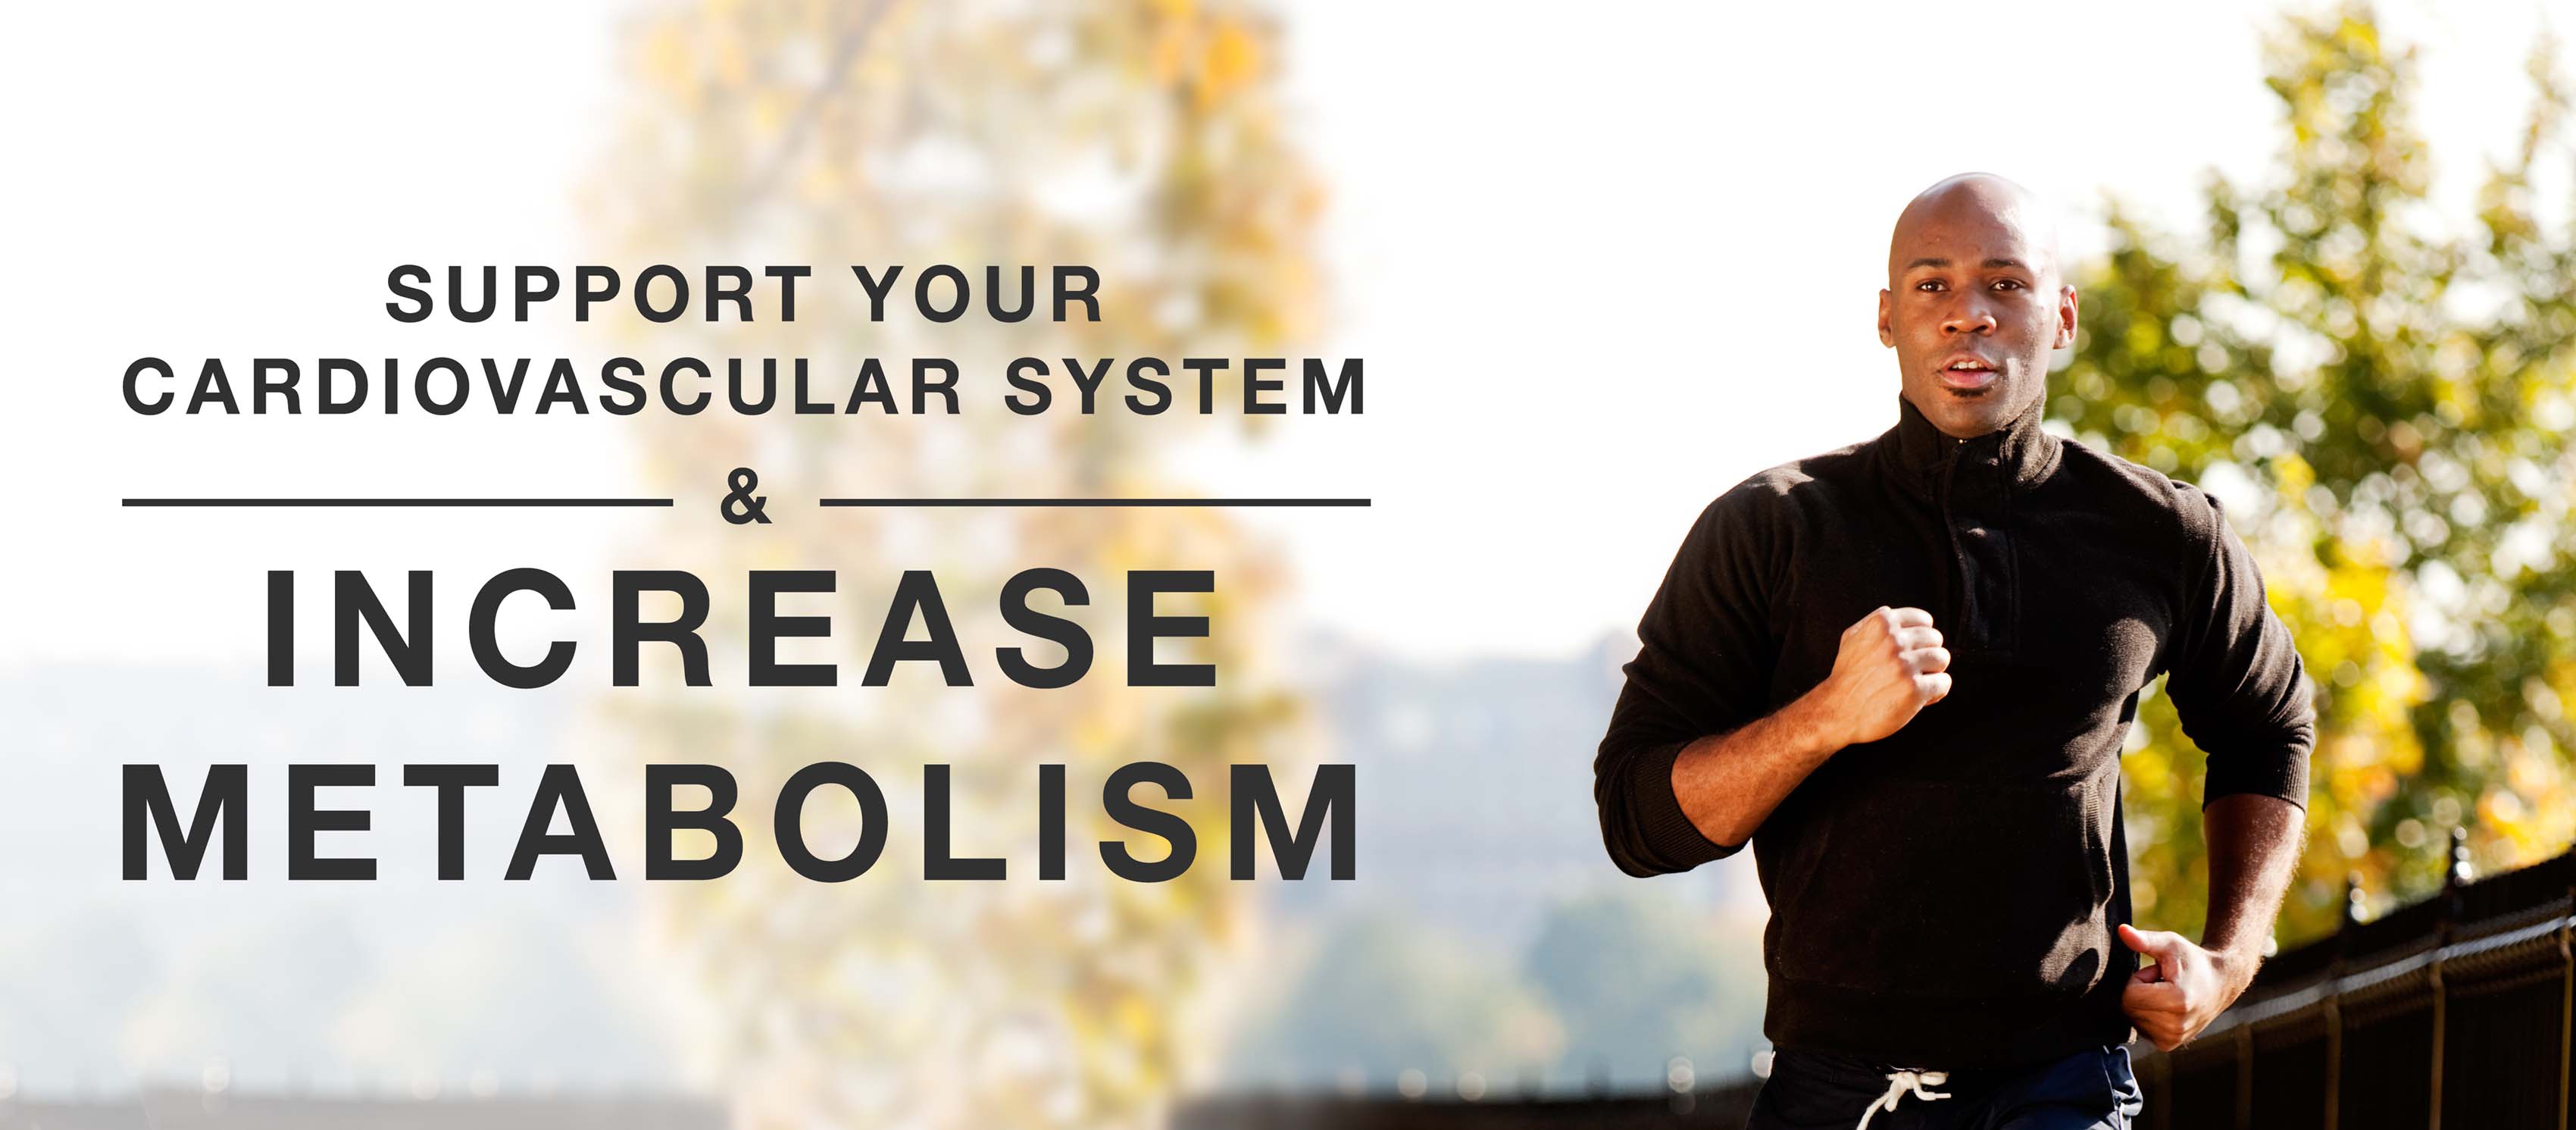 Support your cardiovascular system and increase metabolism.